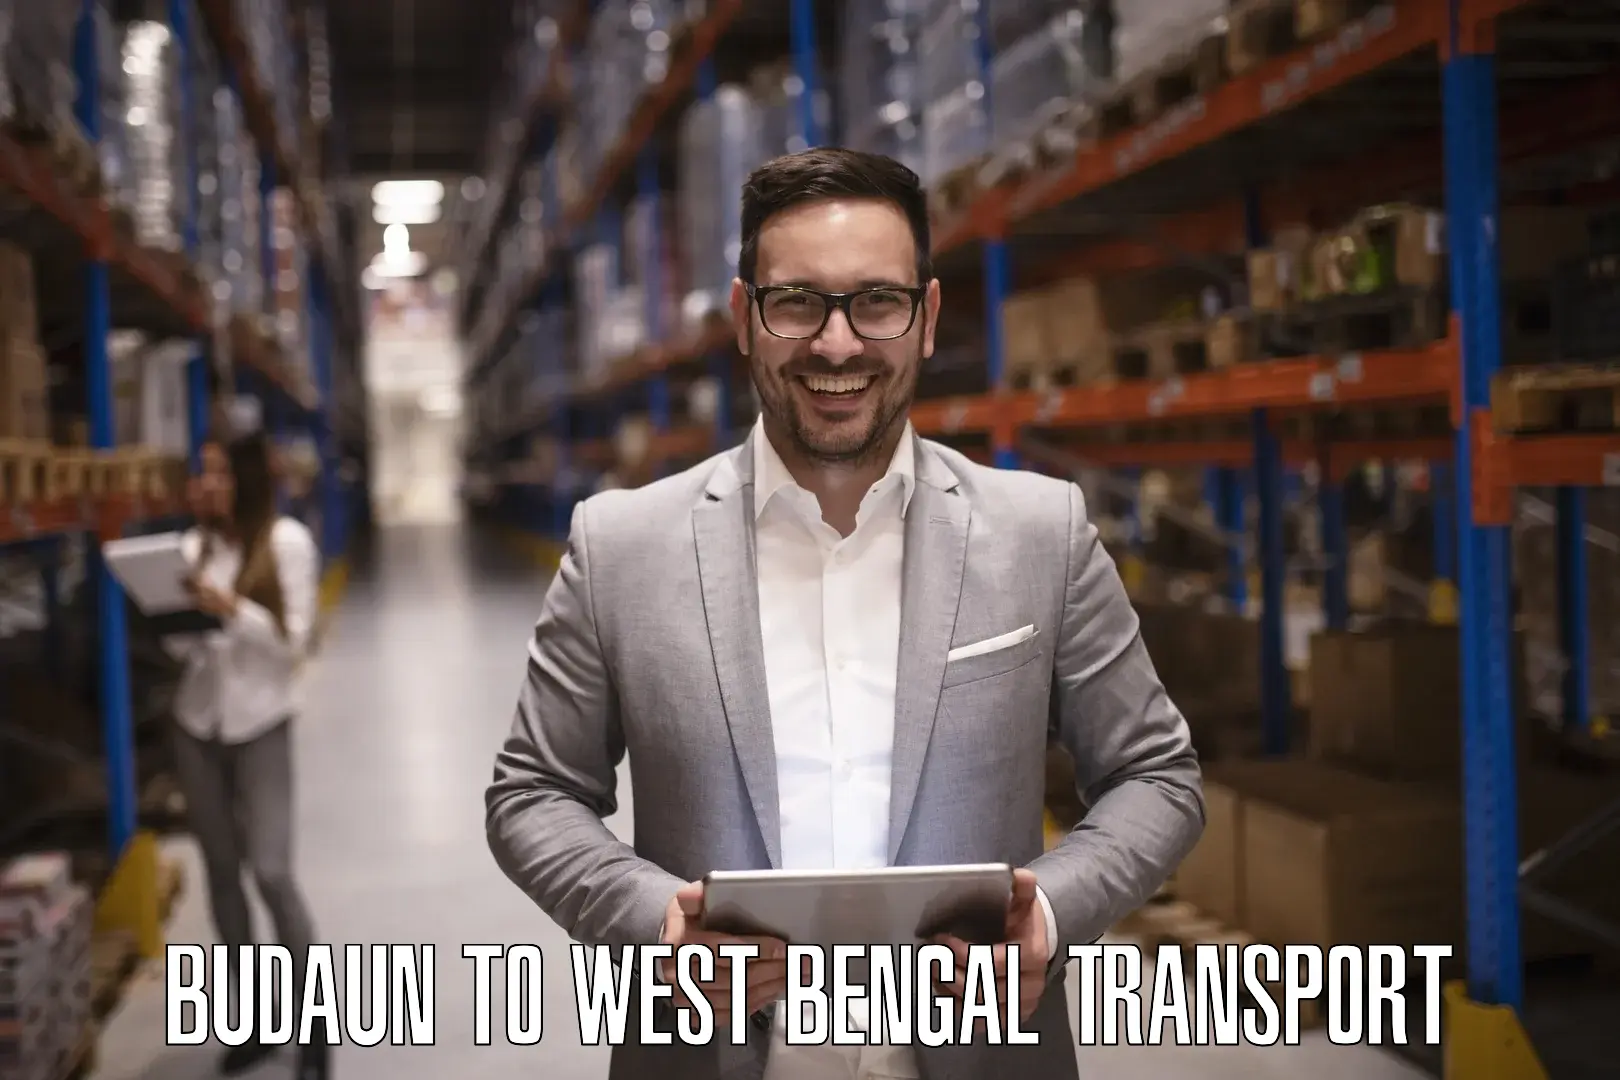 Goods delivery service Budaun to West Bengal